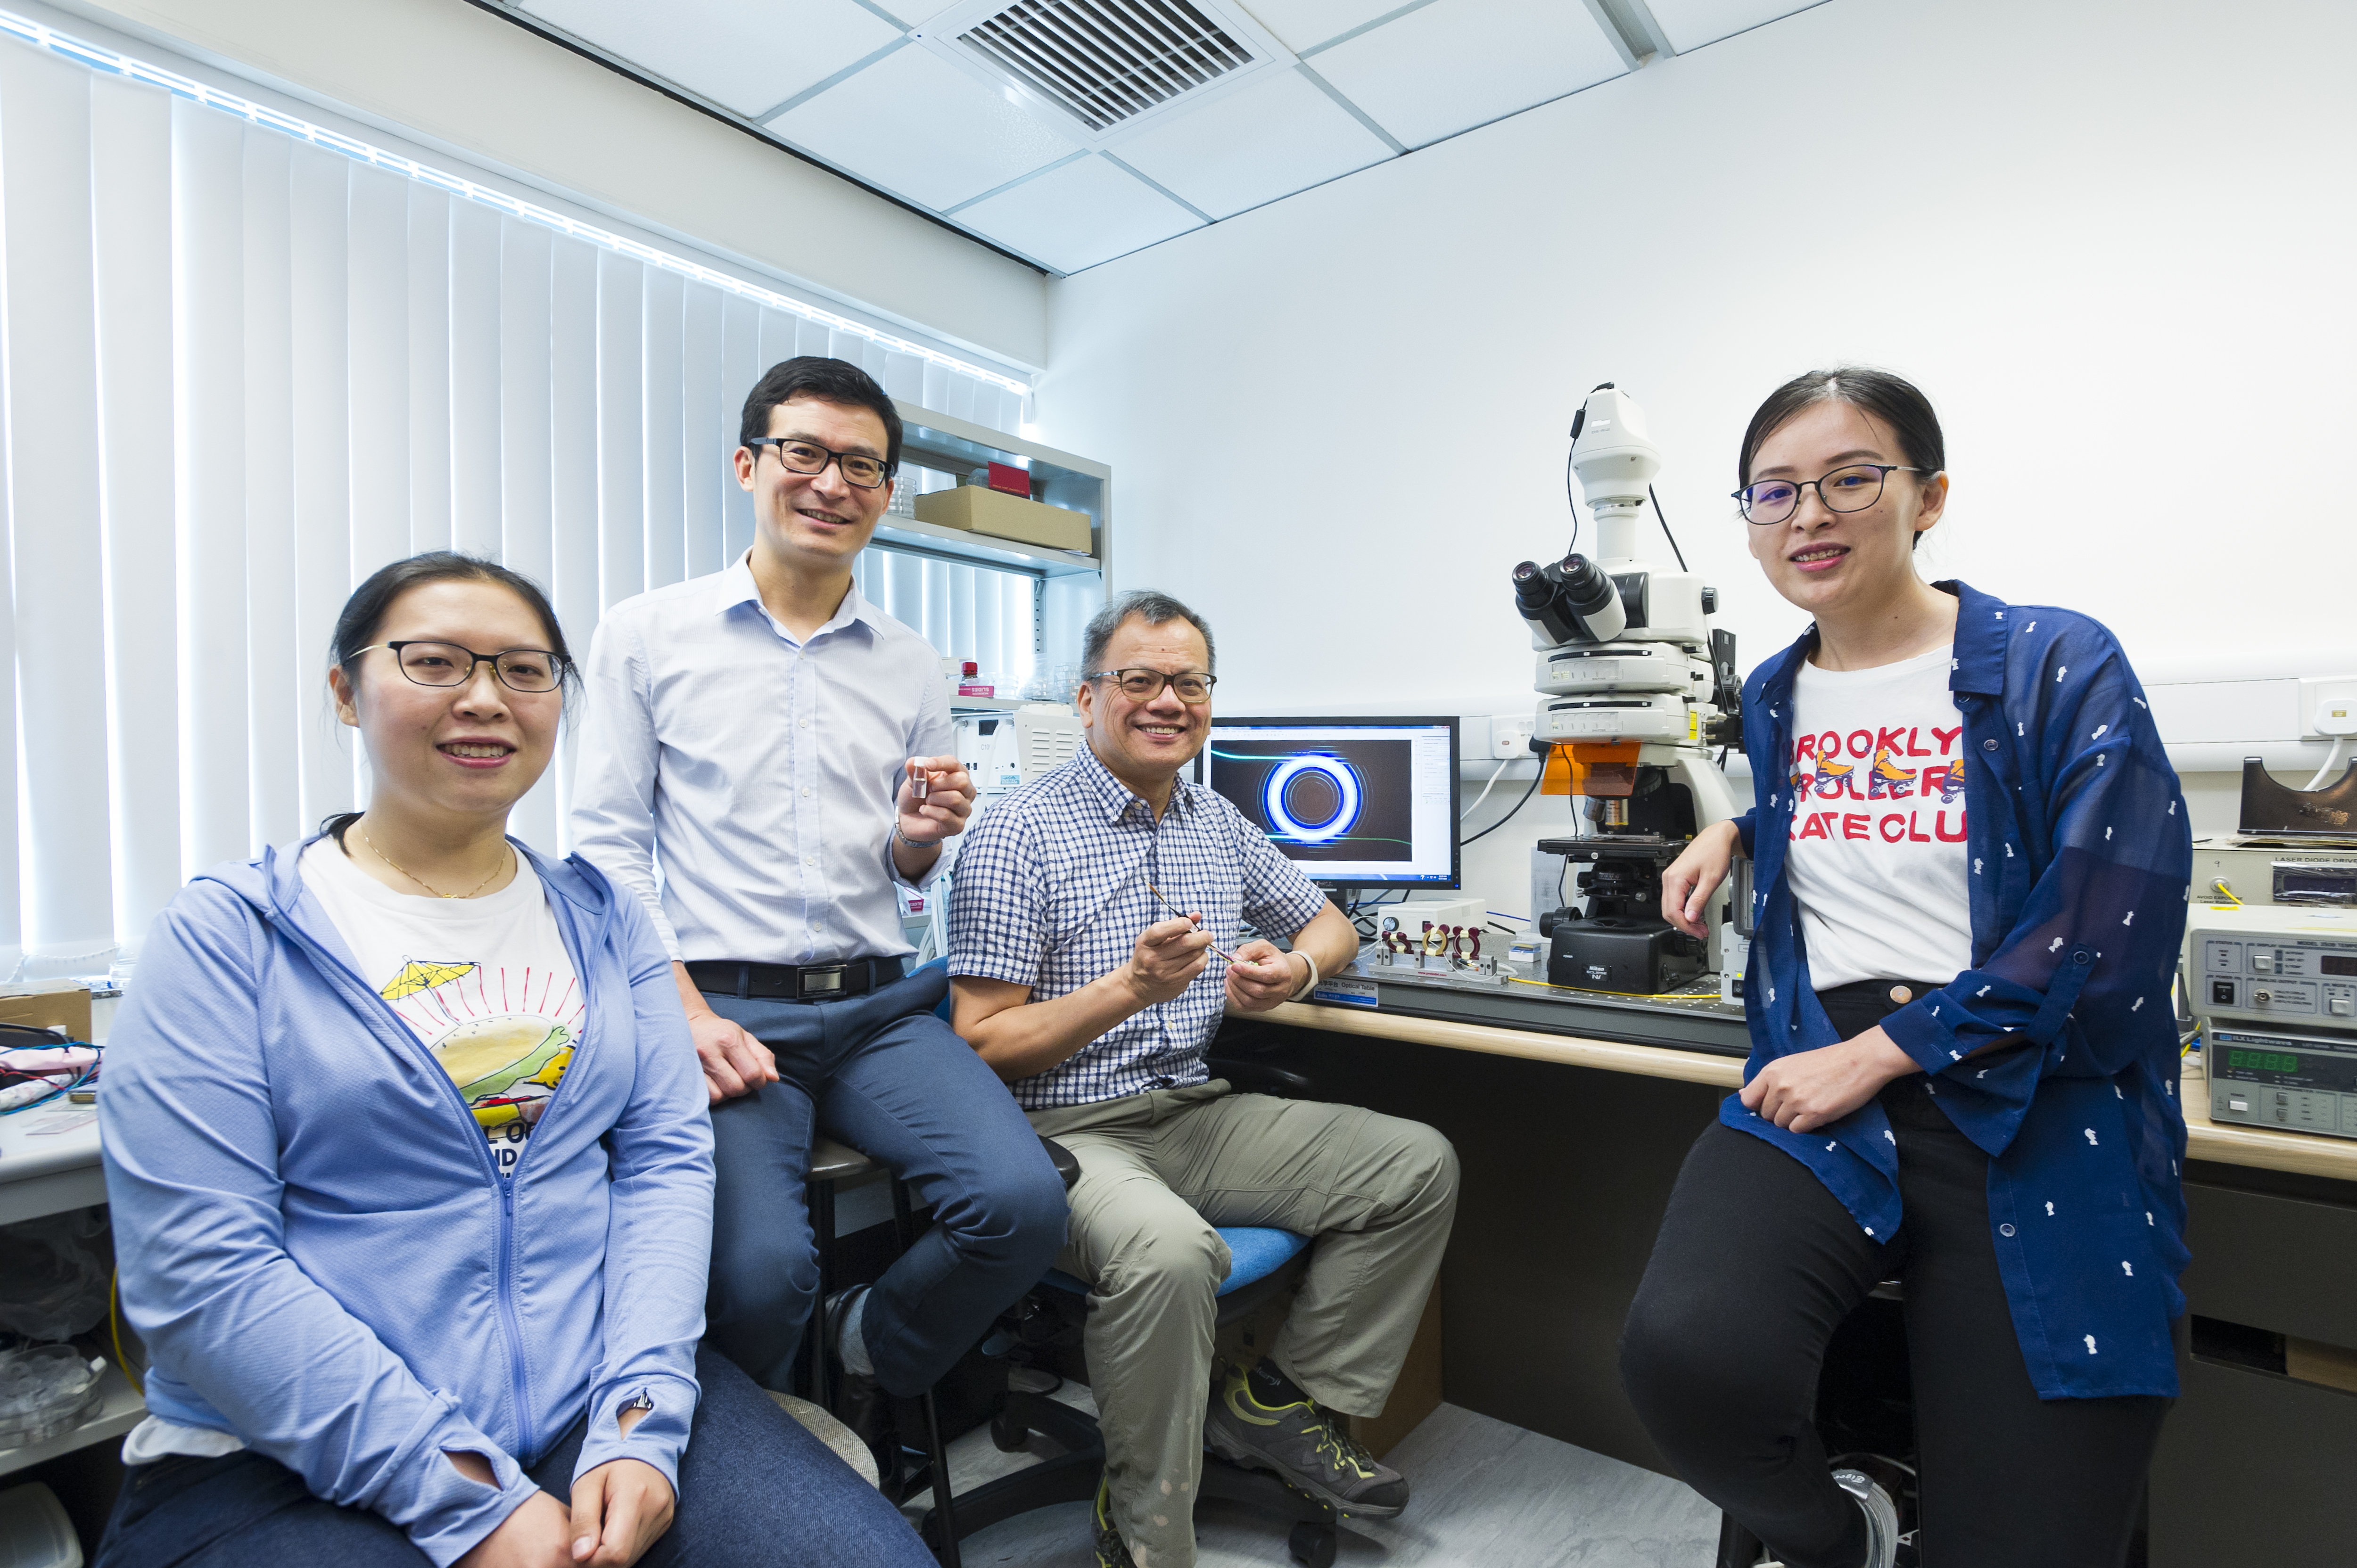 From left to right: Dr Sun Tianying, Dr Wang Feng, Dr Chu Sai-tak and Li Yuhua